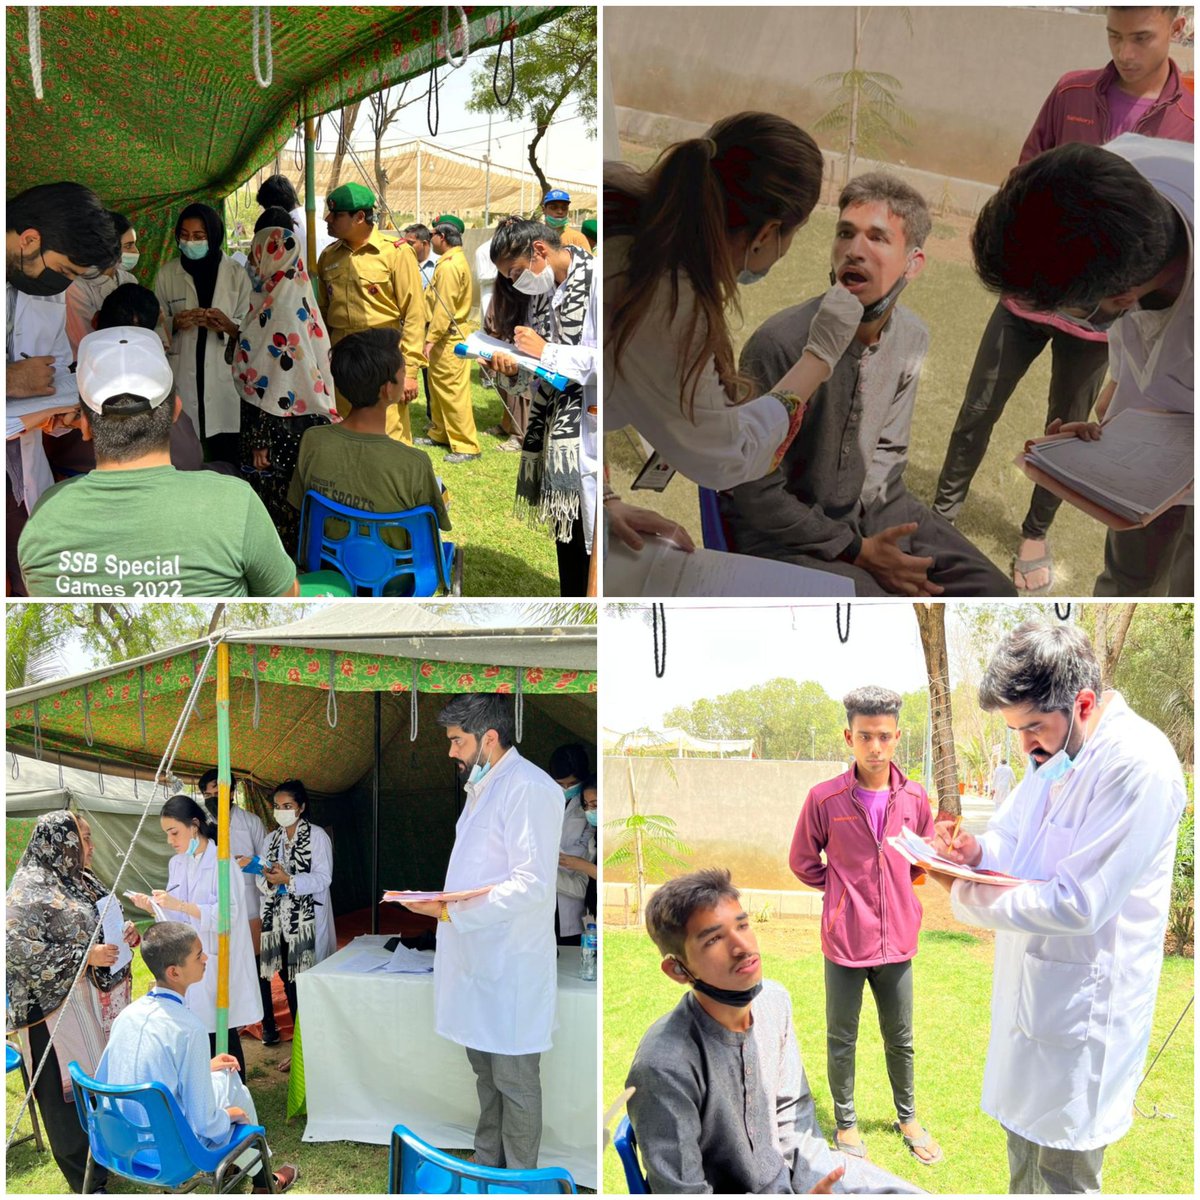 Dental screening Day-1 at 1st Sindh differently abled scouts Agoonoree.
Screened 65 patients with oral hygiene instructions and awareness  along with treatment plan discussed with care takers and institute coordinators.
#differentlyabled 
#dentalscreening 
#sindhscouts